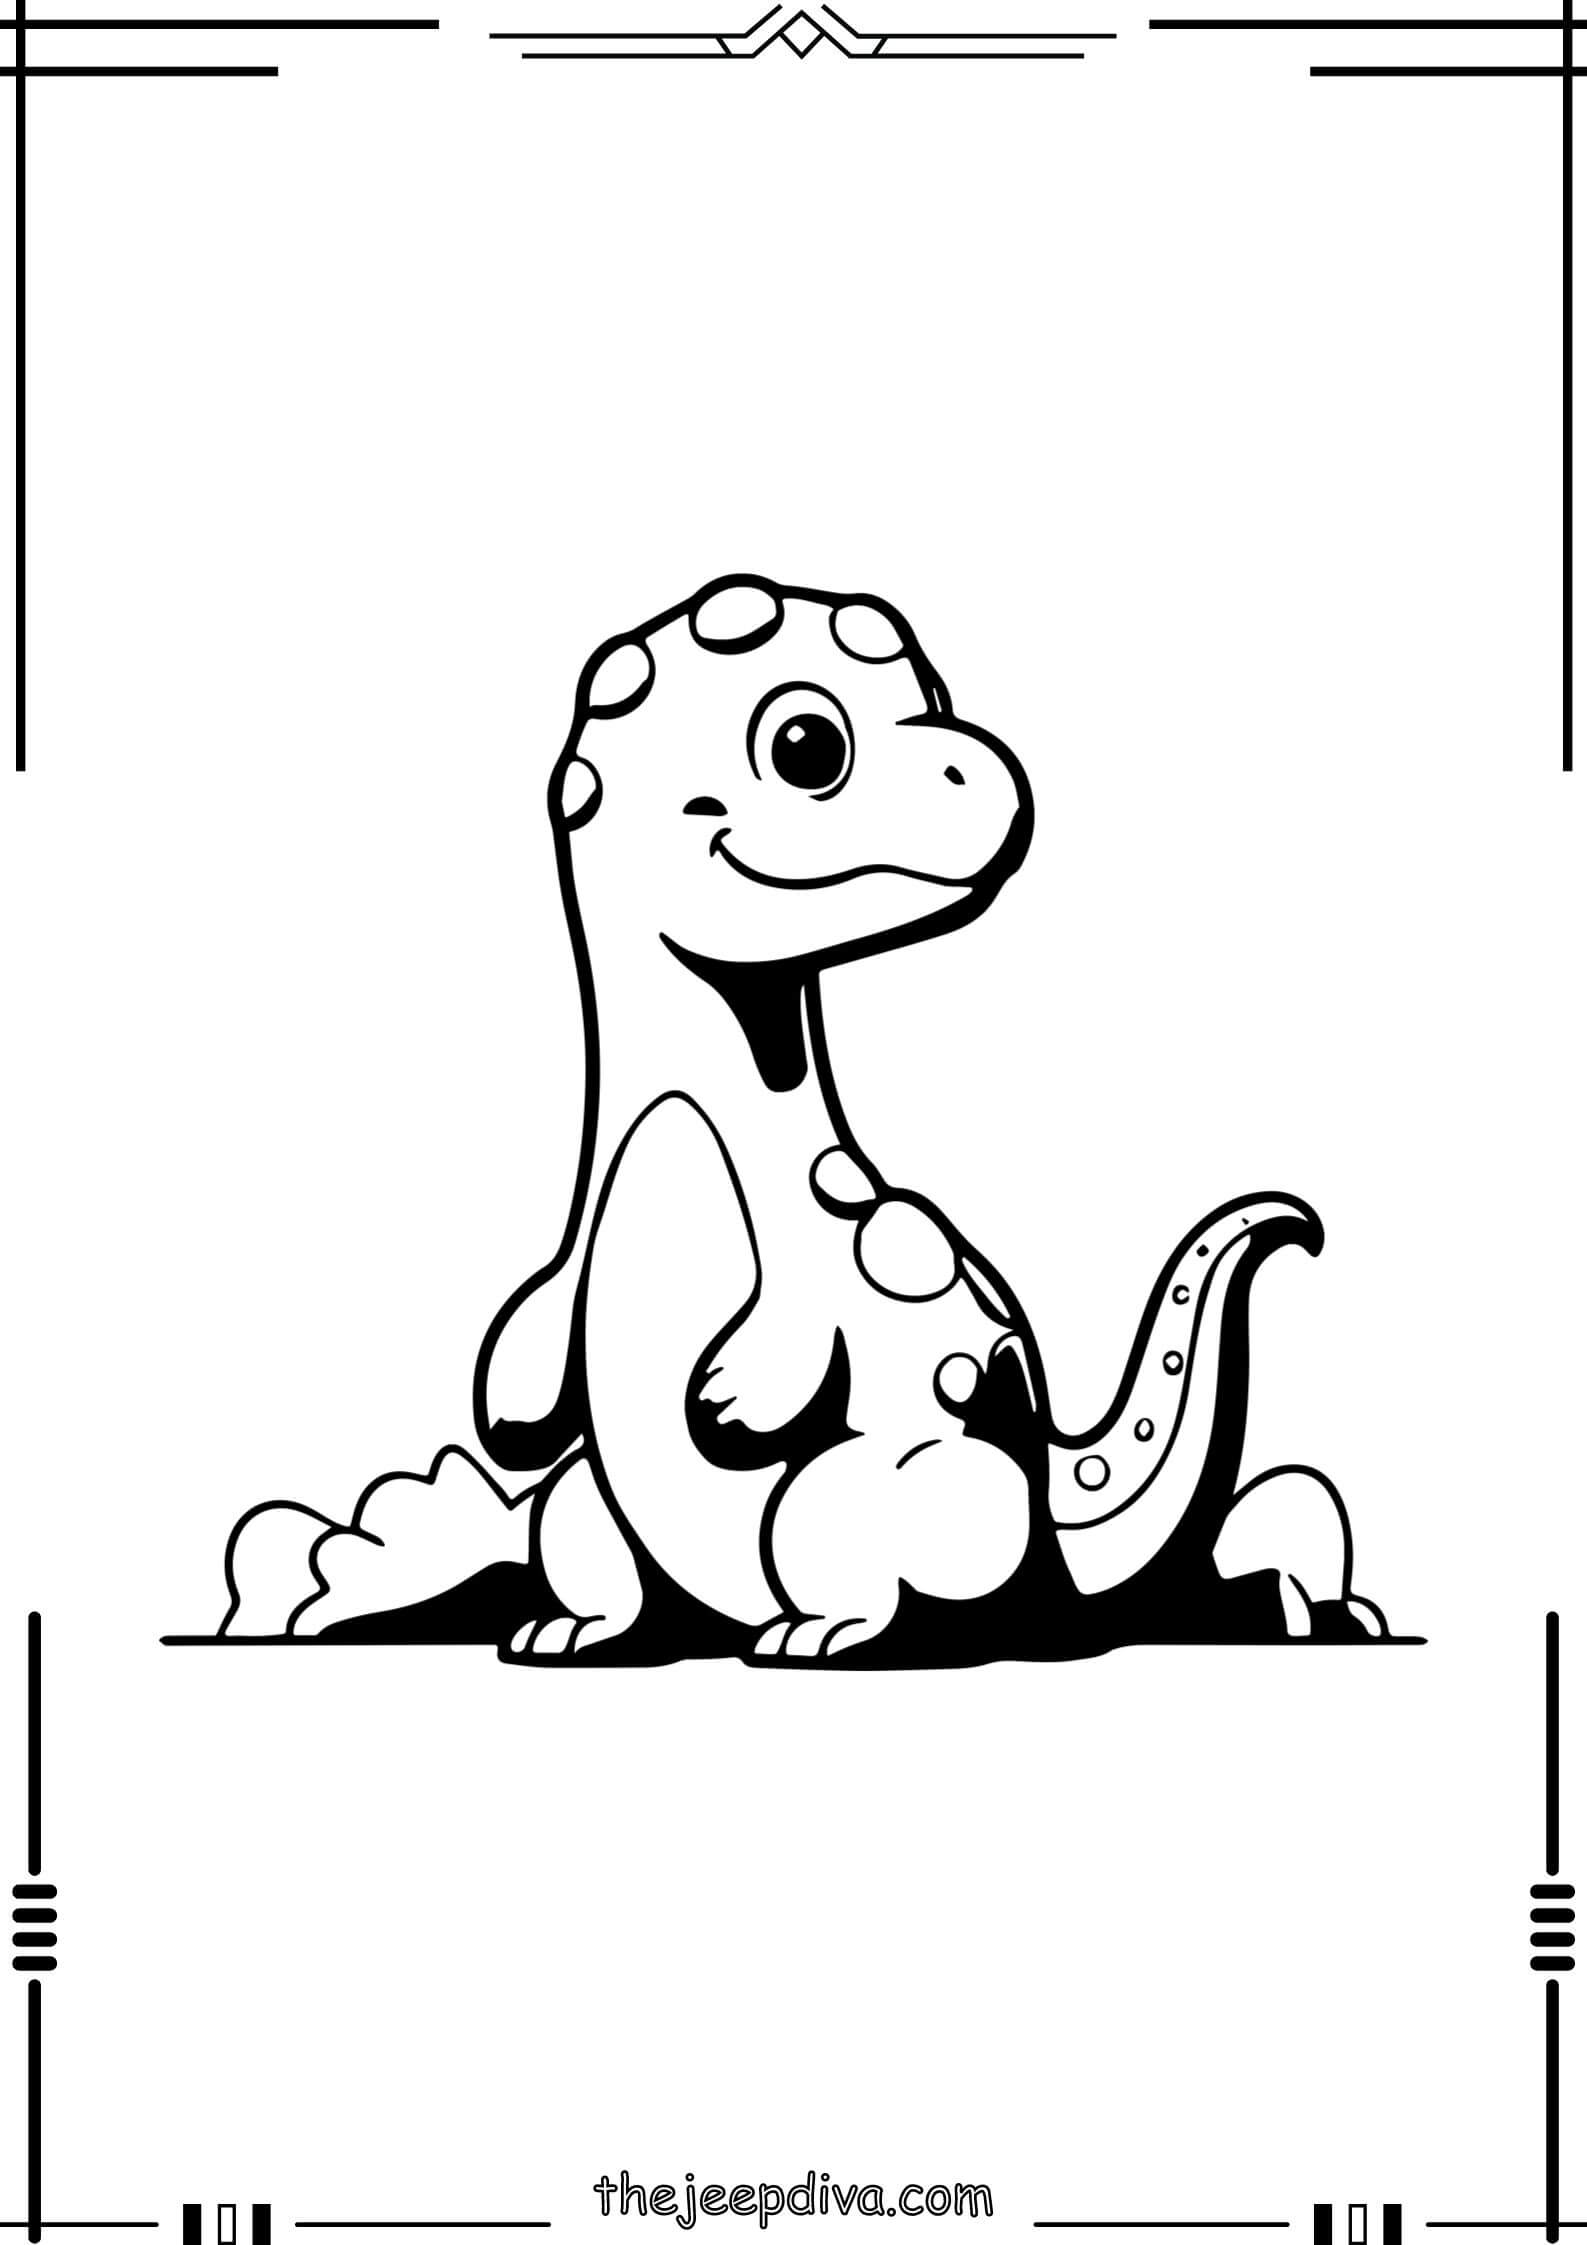 Dinosaur-Colouring-Pages-Easy-11